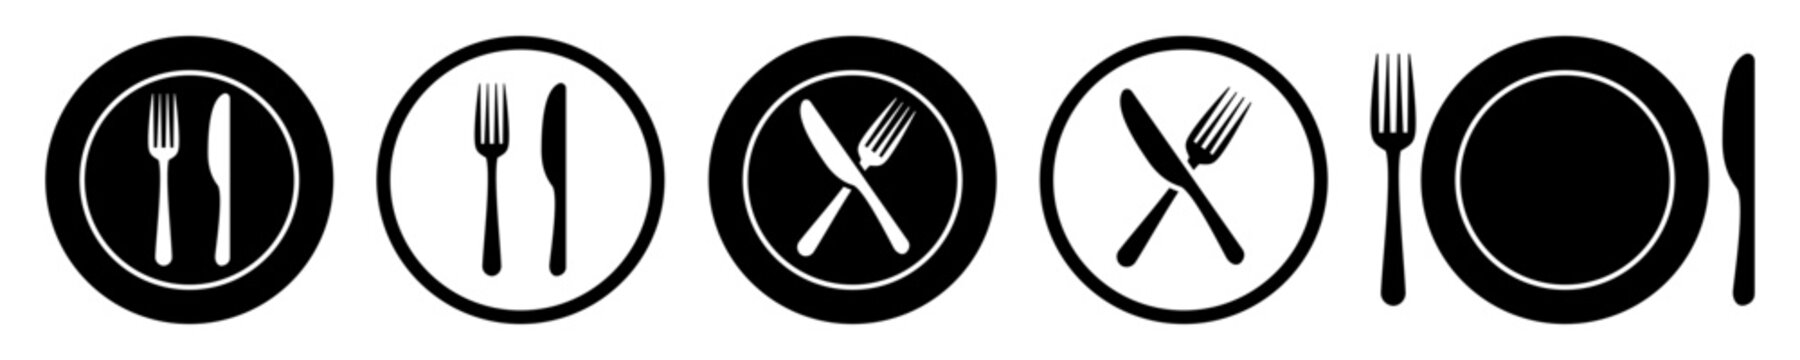 Set plate, fork and knife icons - vector